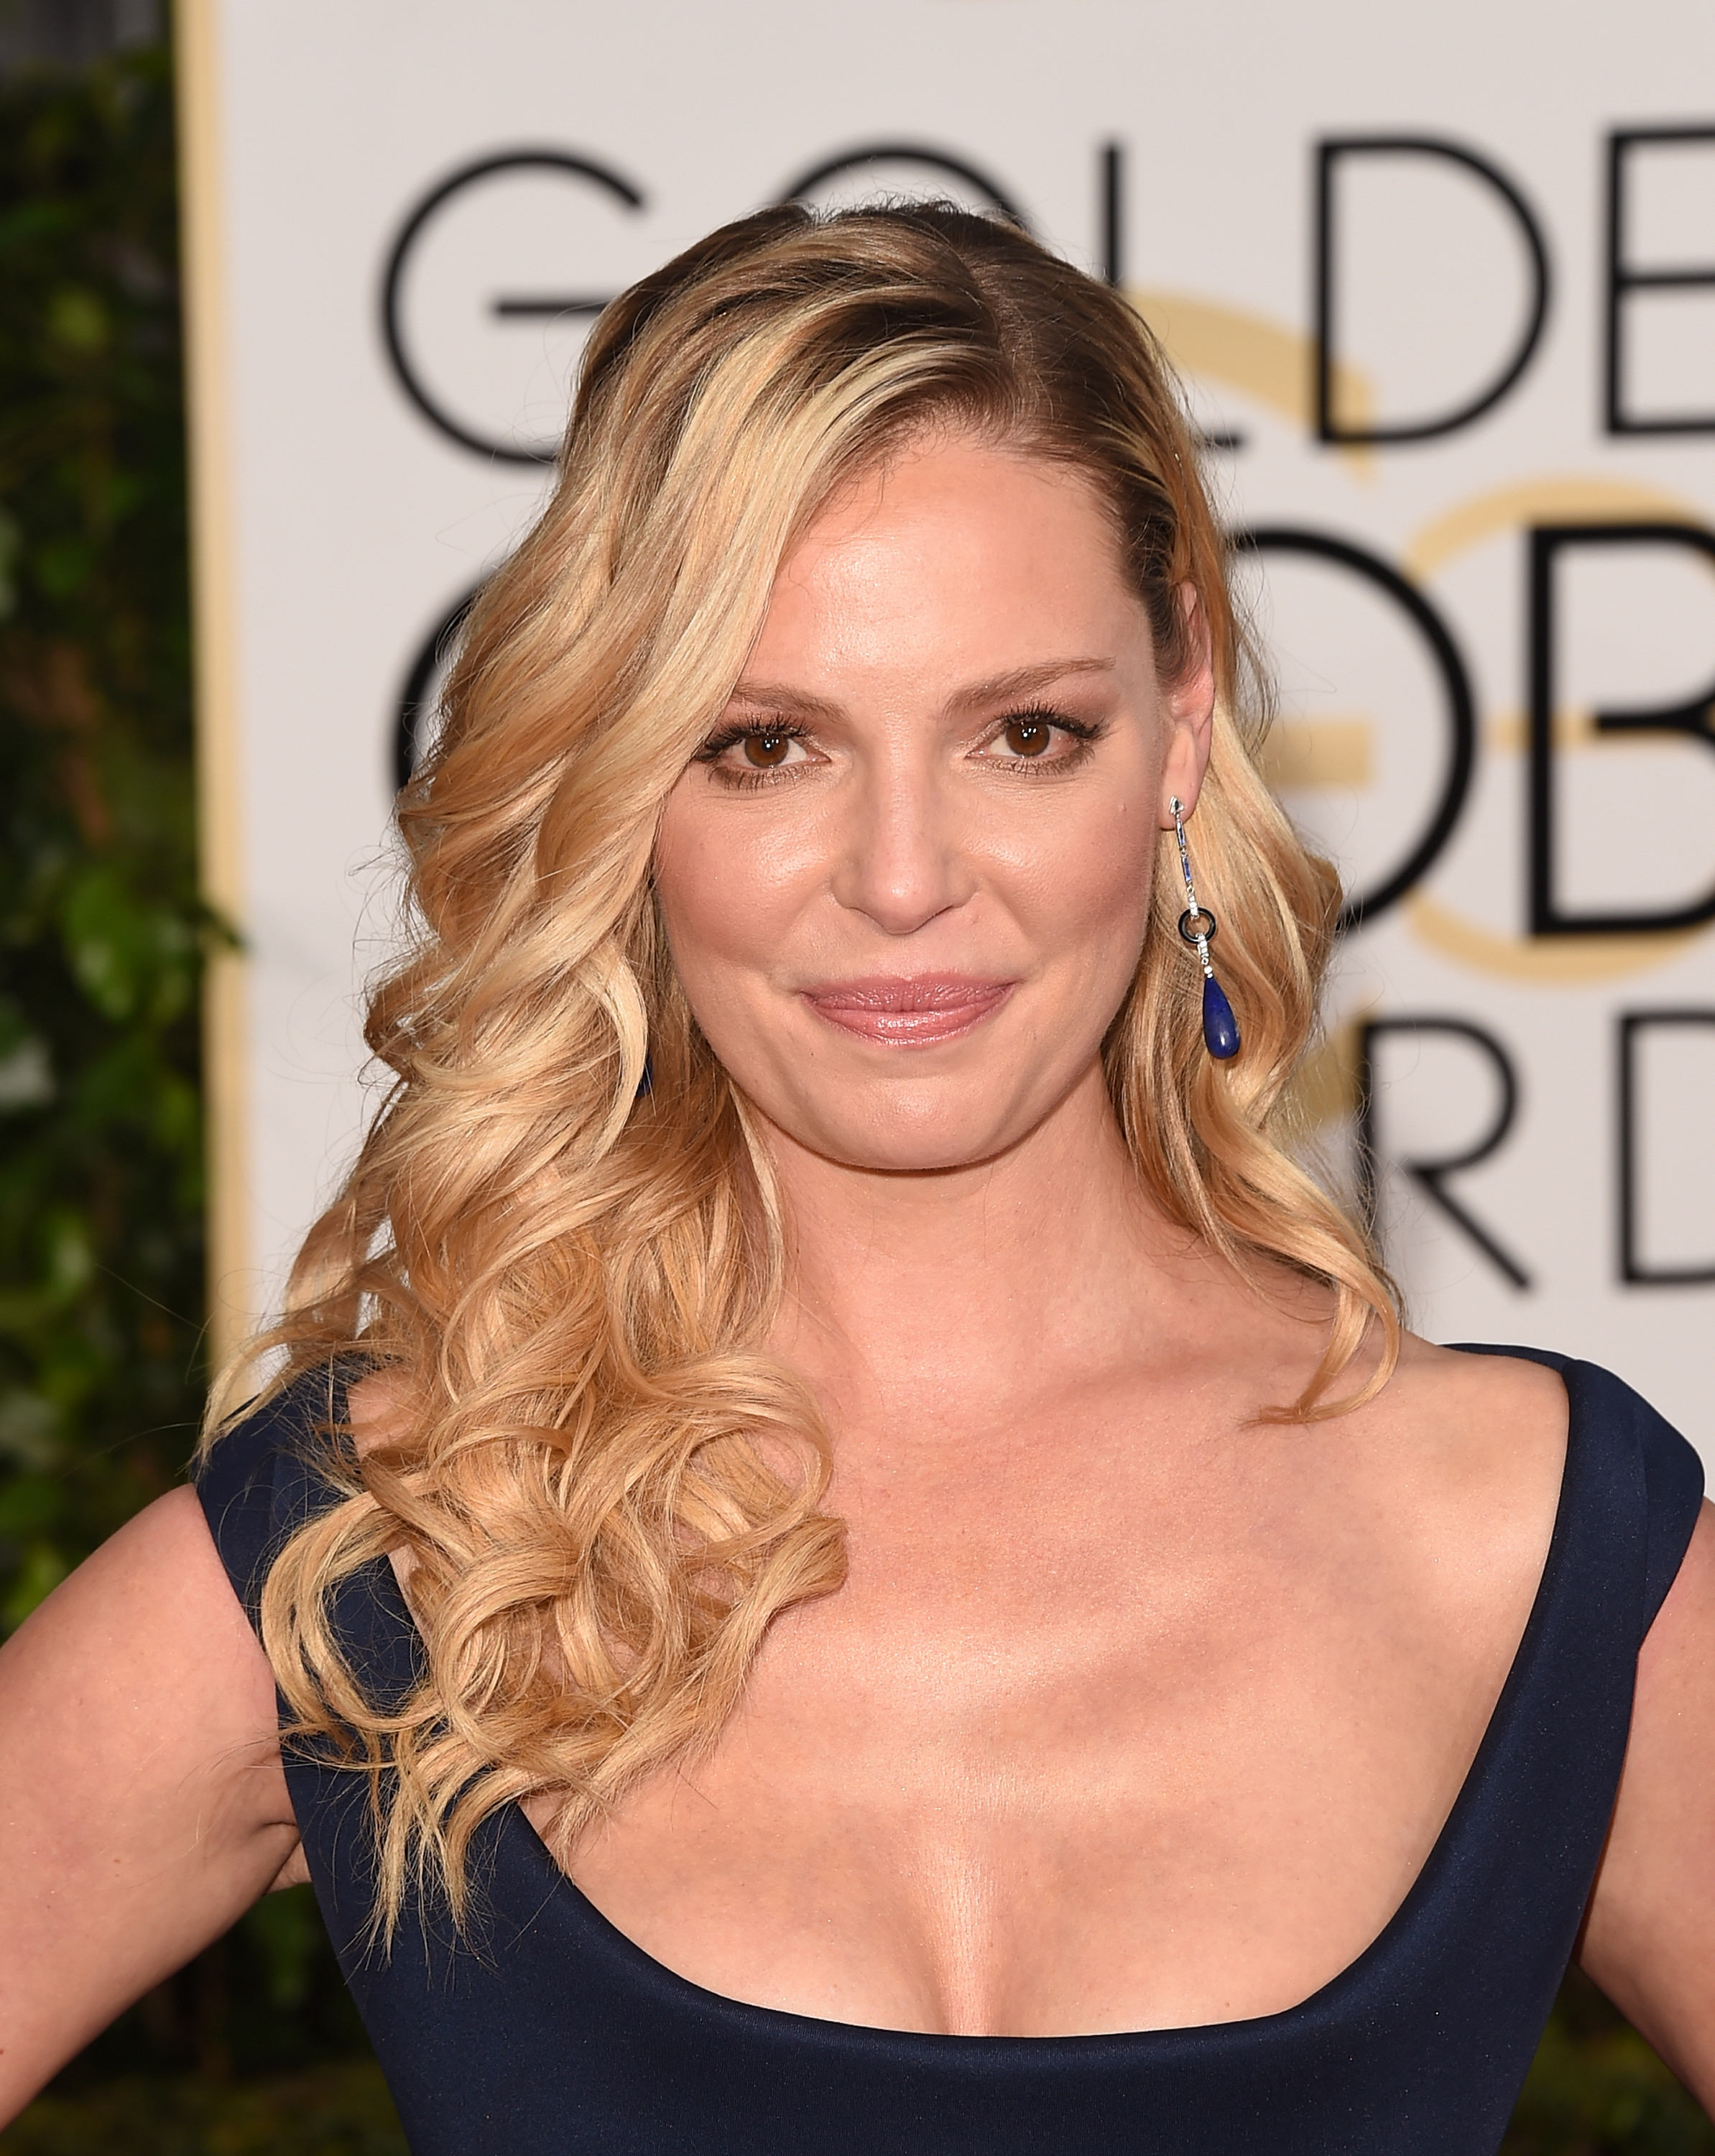 Katherine Heigl S Short Brown Hair Will Make You Do A Double Take Photos